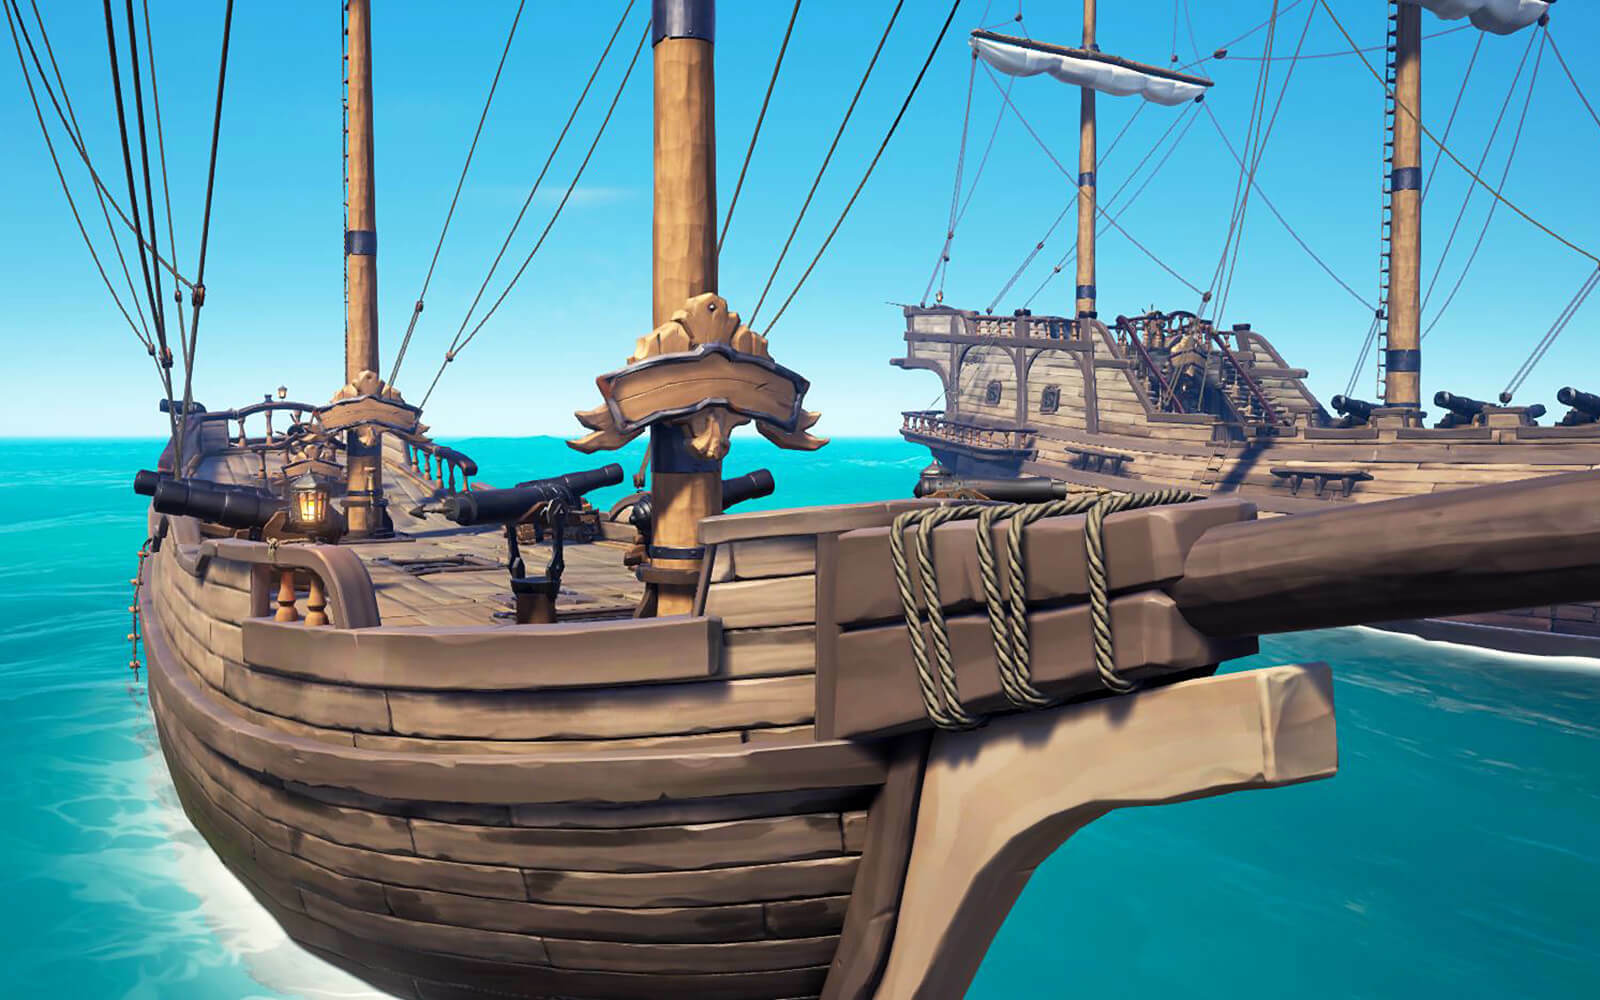 Skull and Bones invites players to test the high seas next weekend